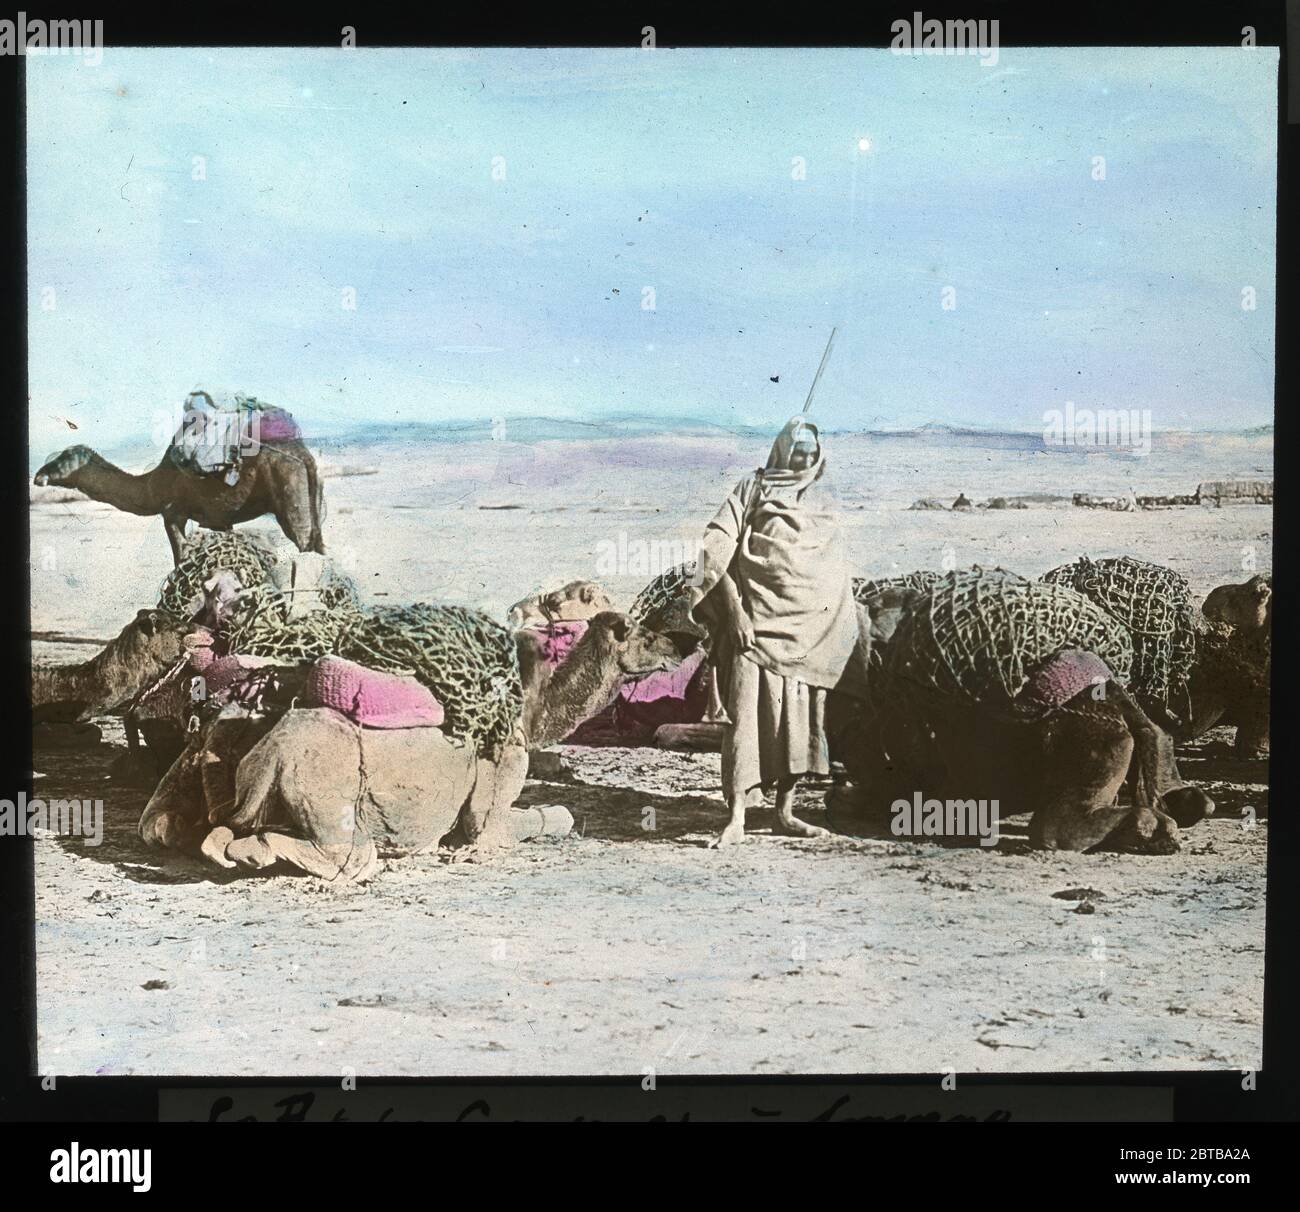 Le Pont des Caravances en Smyrne. Color slide from around 1910. Photograph on dry glass plate from the Herry W. Schaefer collection. Stock Photo